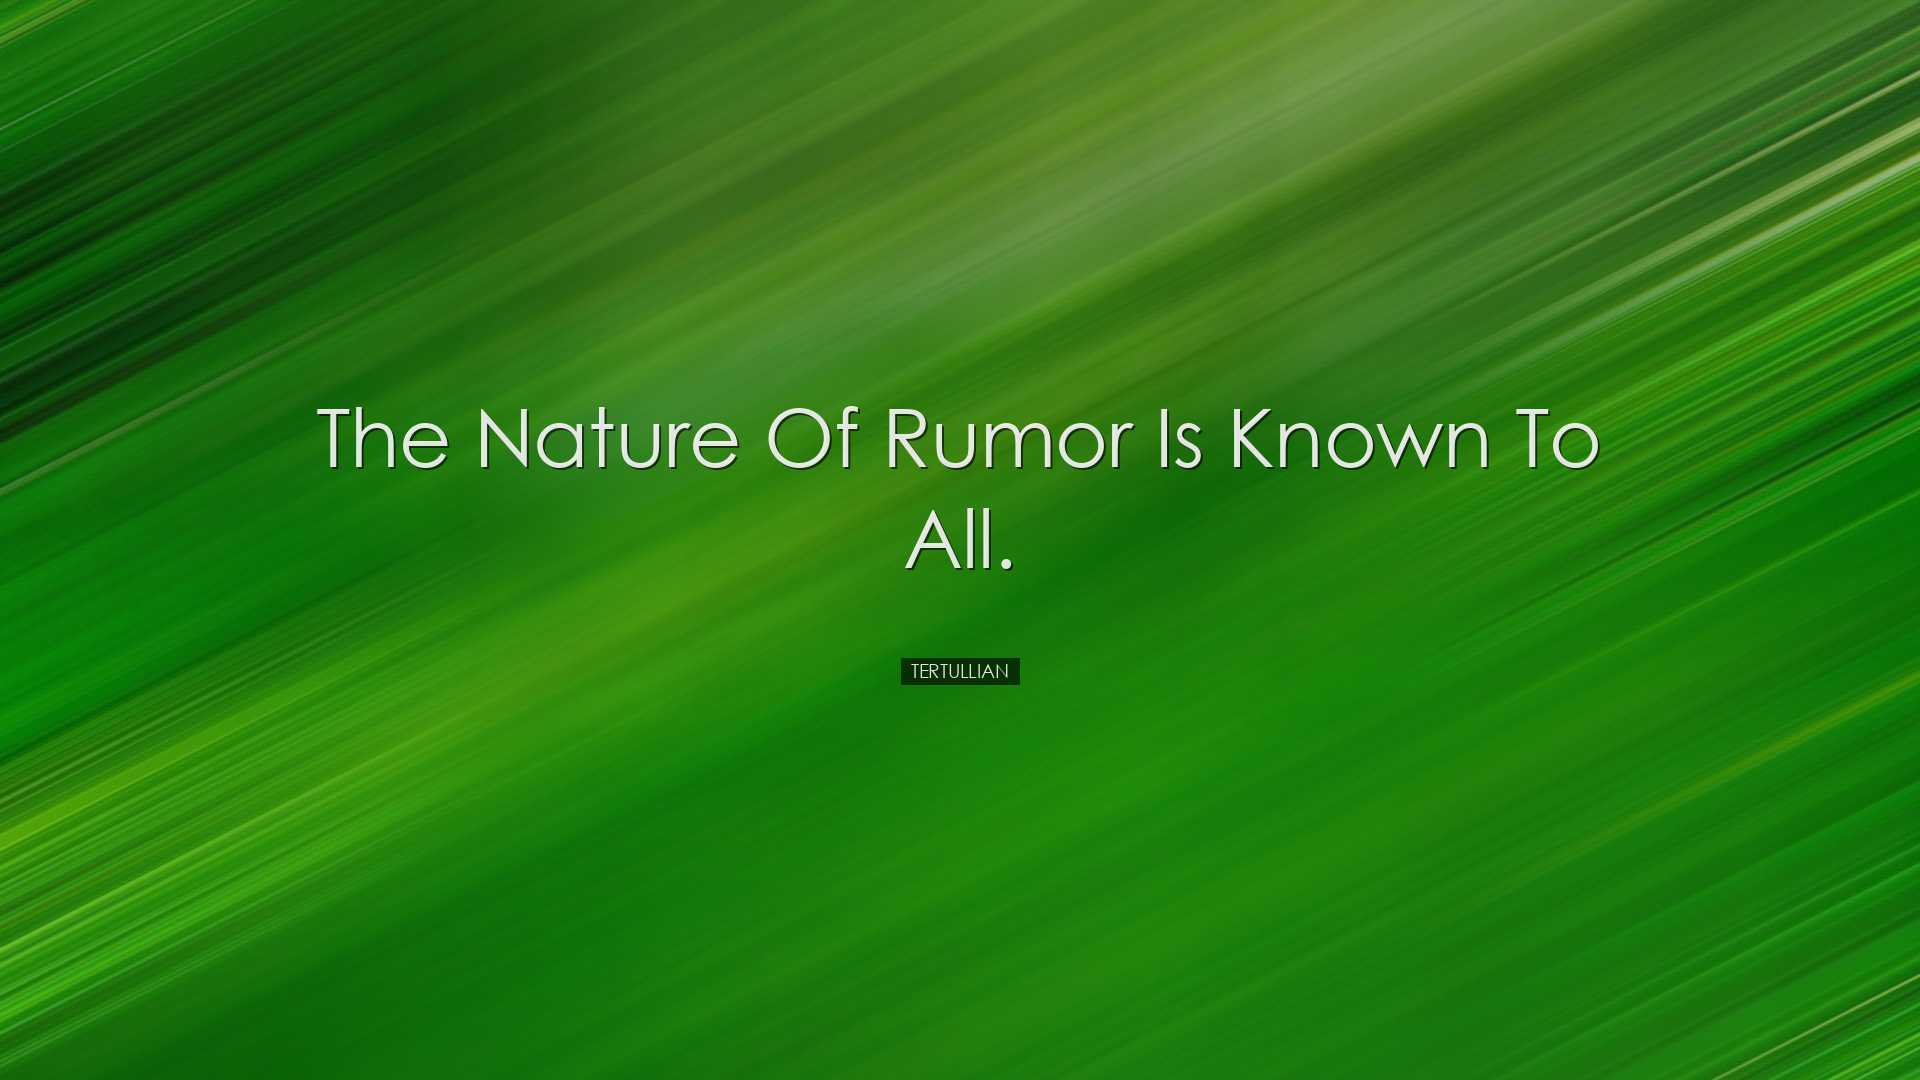 The nature of rumor is known to all. - Tertullian